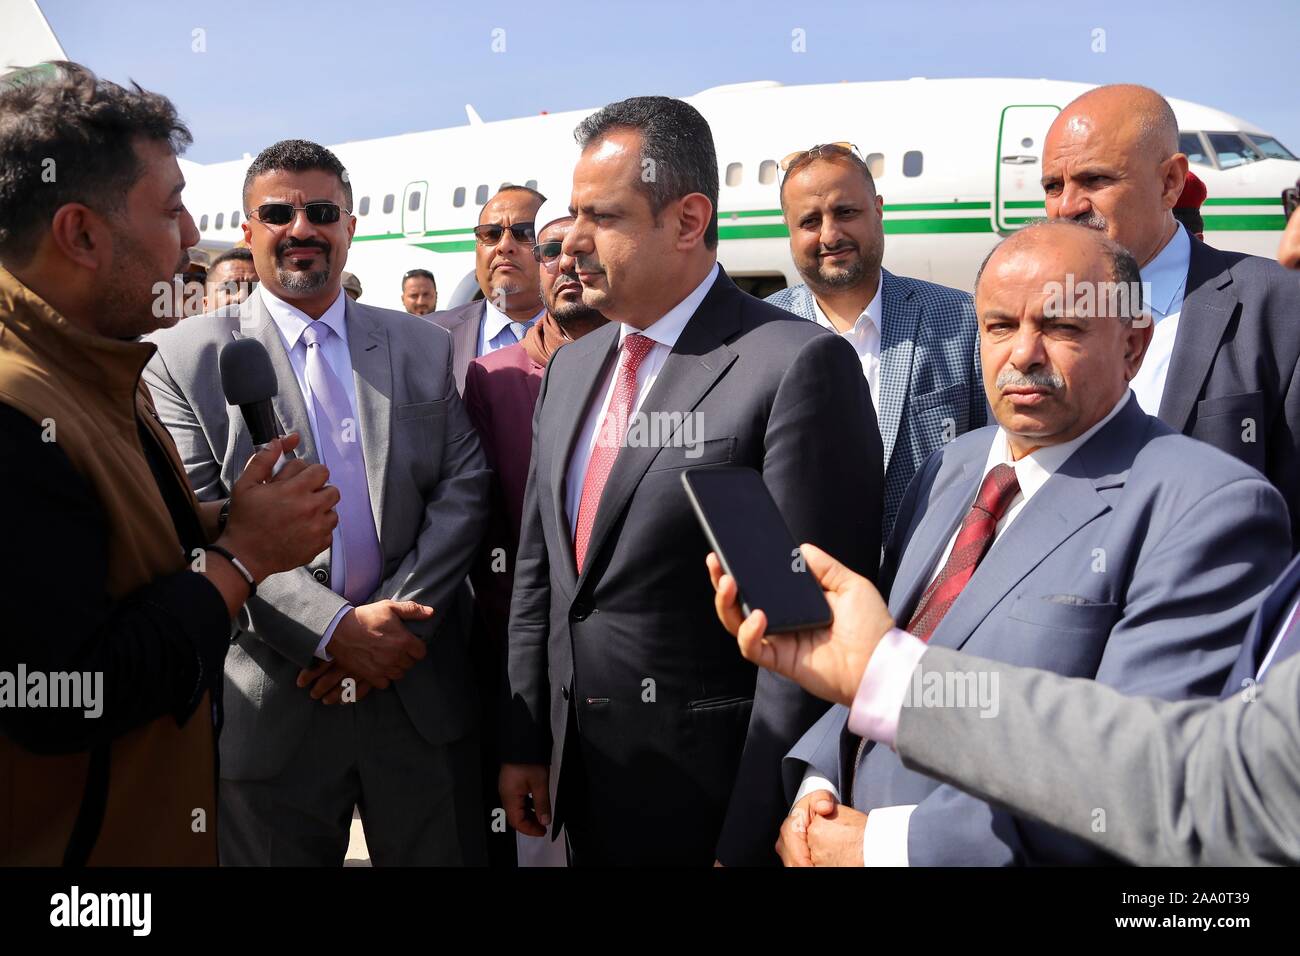 Aden. 18th Nov, 2019. Yemen's Prime Minister Maeen Abdulmalik (C) is interviewed upon his arrival at Aden's International Airport, Yemen, on Nov. 18, 2019. Yemen's Prime Minister Maeen Abdulmalik and other ministers and government officials arrived on Monday in the country's southern port city of Aden. Credit: Xinhua/Alamy Live News Stock Photo